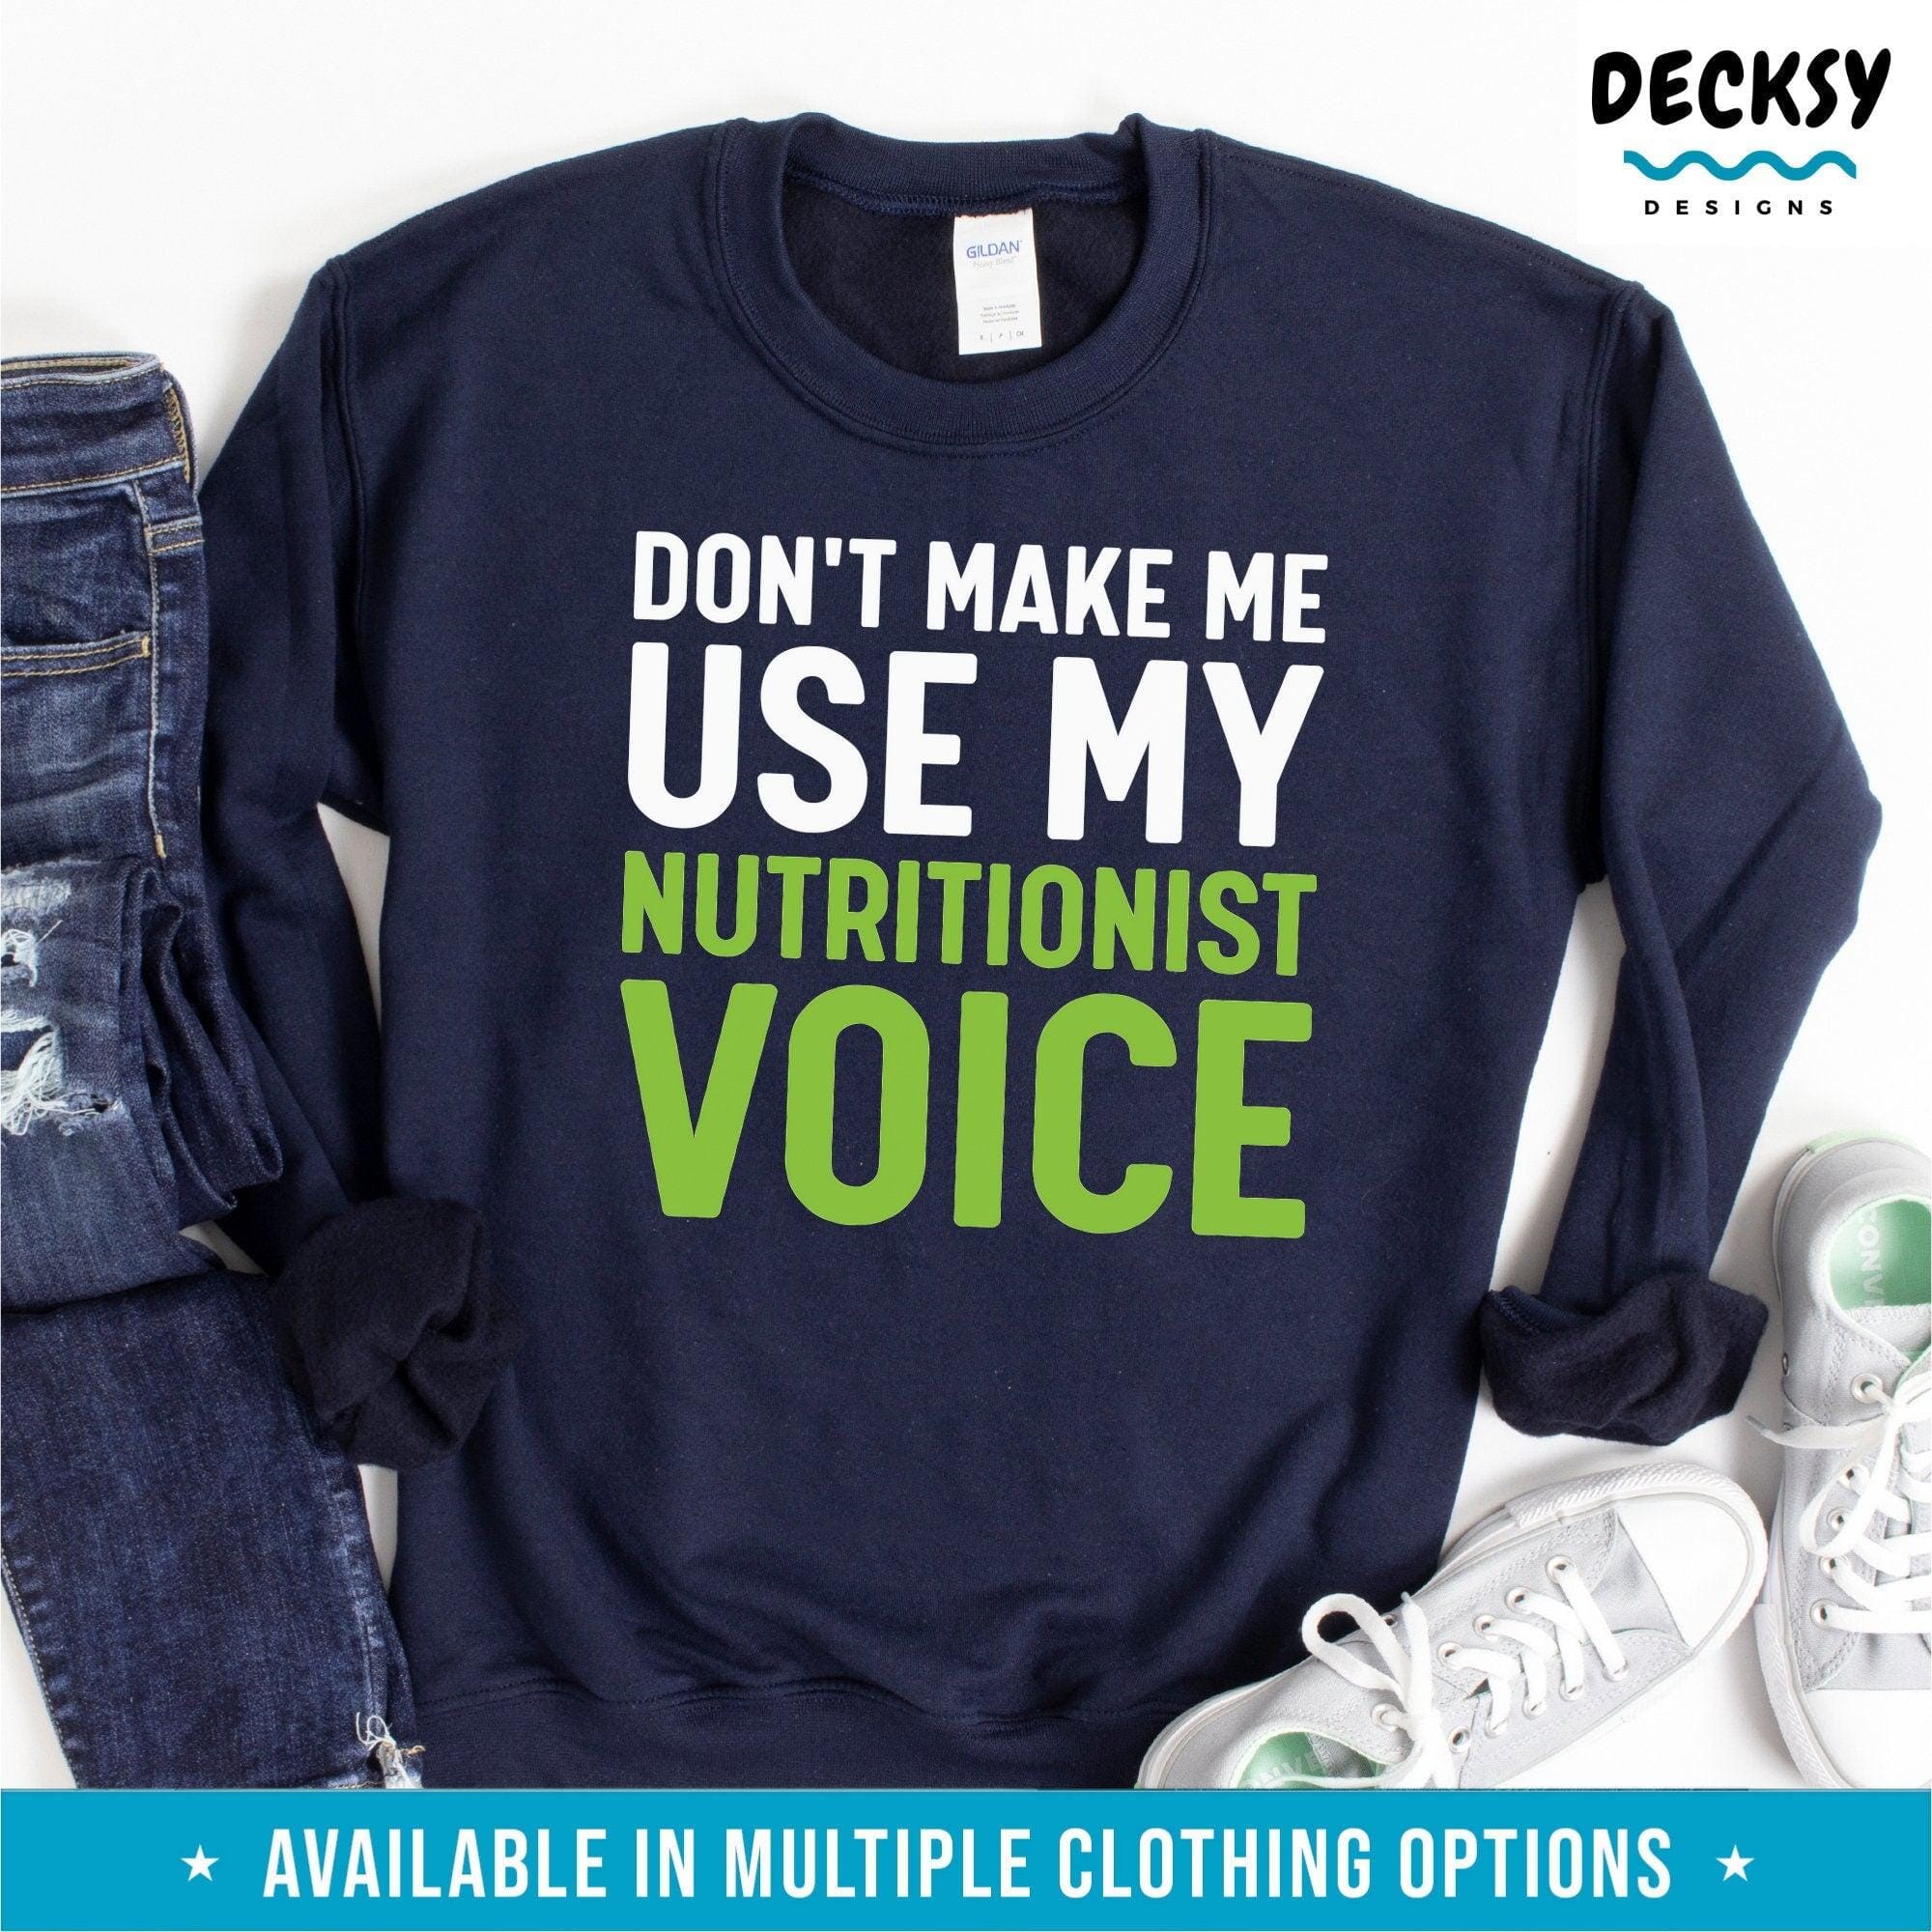 Nutritionist Shirt, Gift For Health Coach-Clothing:Gender-Neutral Adult Clothing:Tops & Tees:T-shirts:Graphic Tees-DecksyDesigns